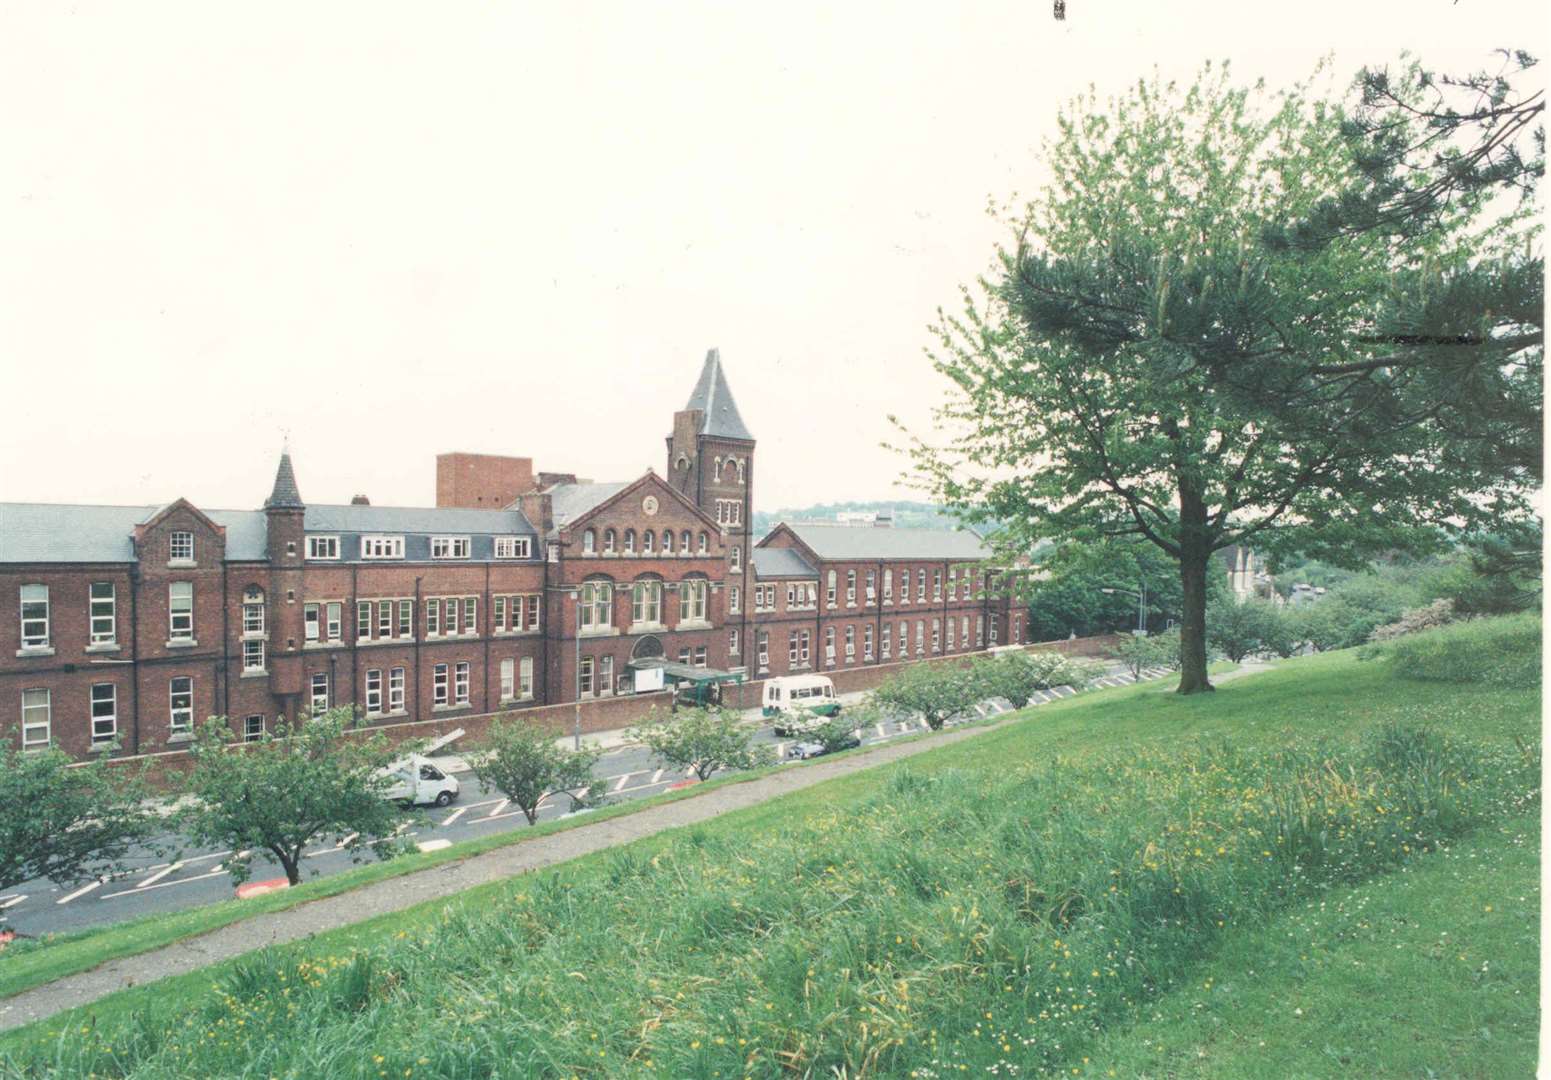 Looking down on St Bart's Hospital, Rochester in 1994